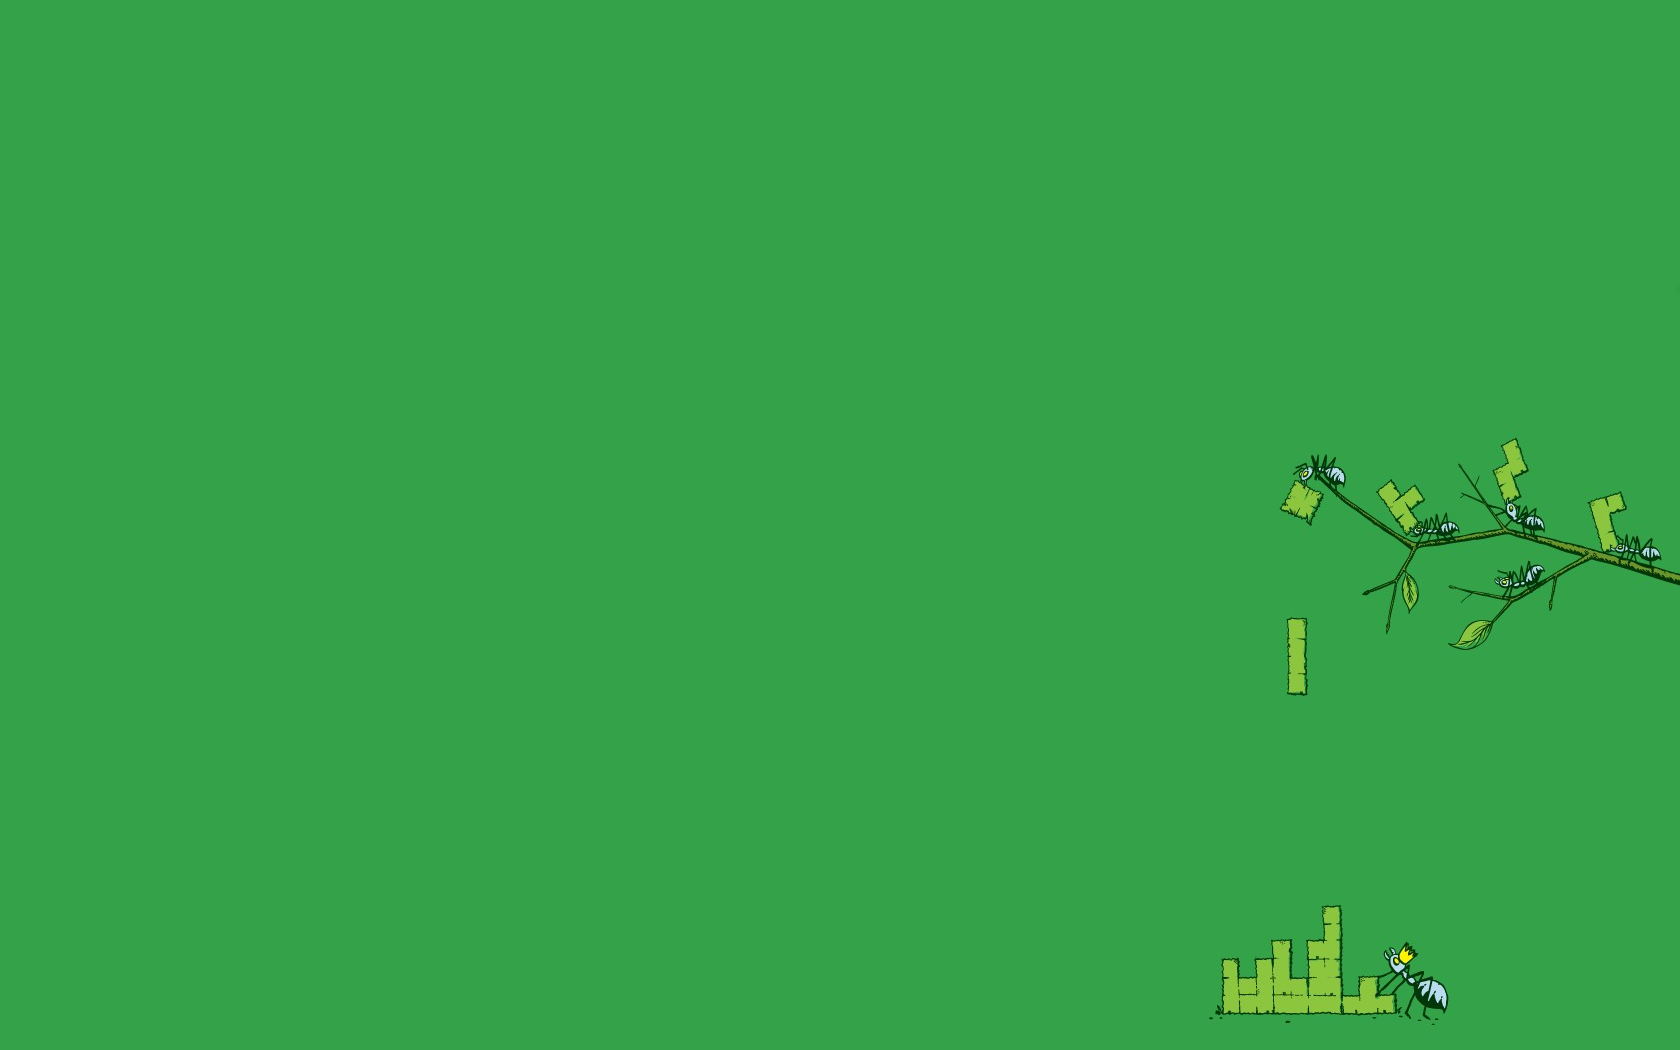 General 1680x1050 minimalism Tetris ants green background humor green video game art simple background video games animals insect